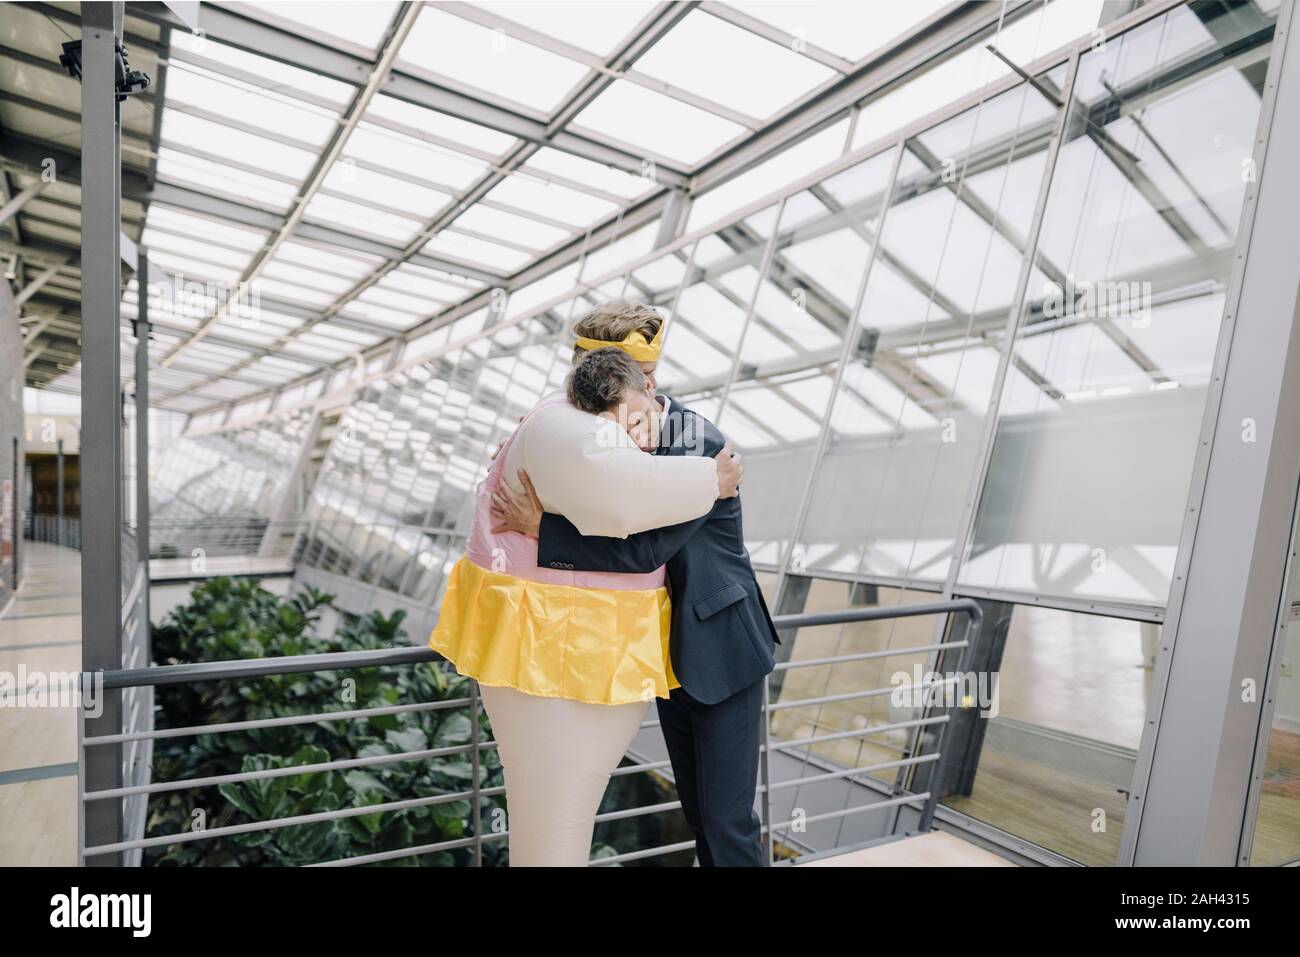 Businessman and man dressed up as a ballerina hugging in modern office building Stock Photo